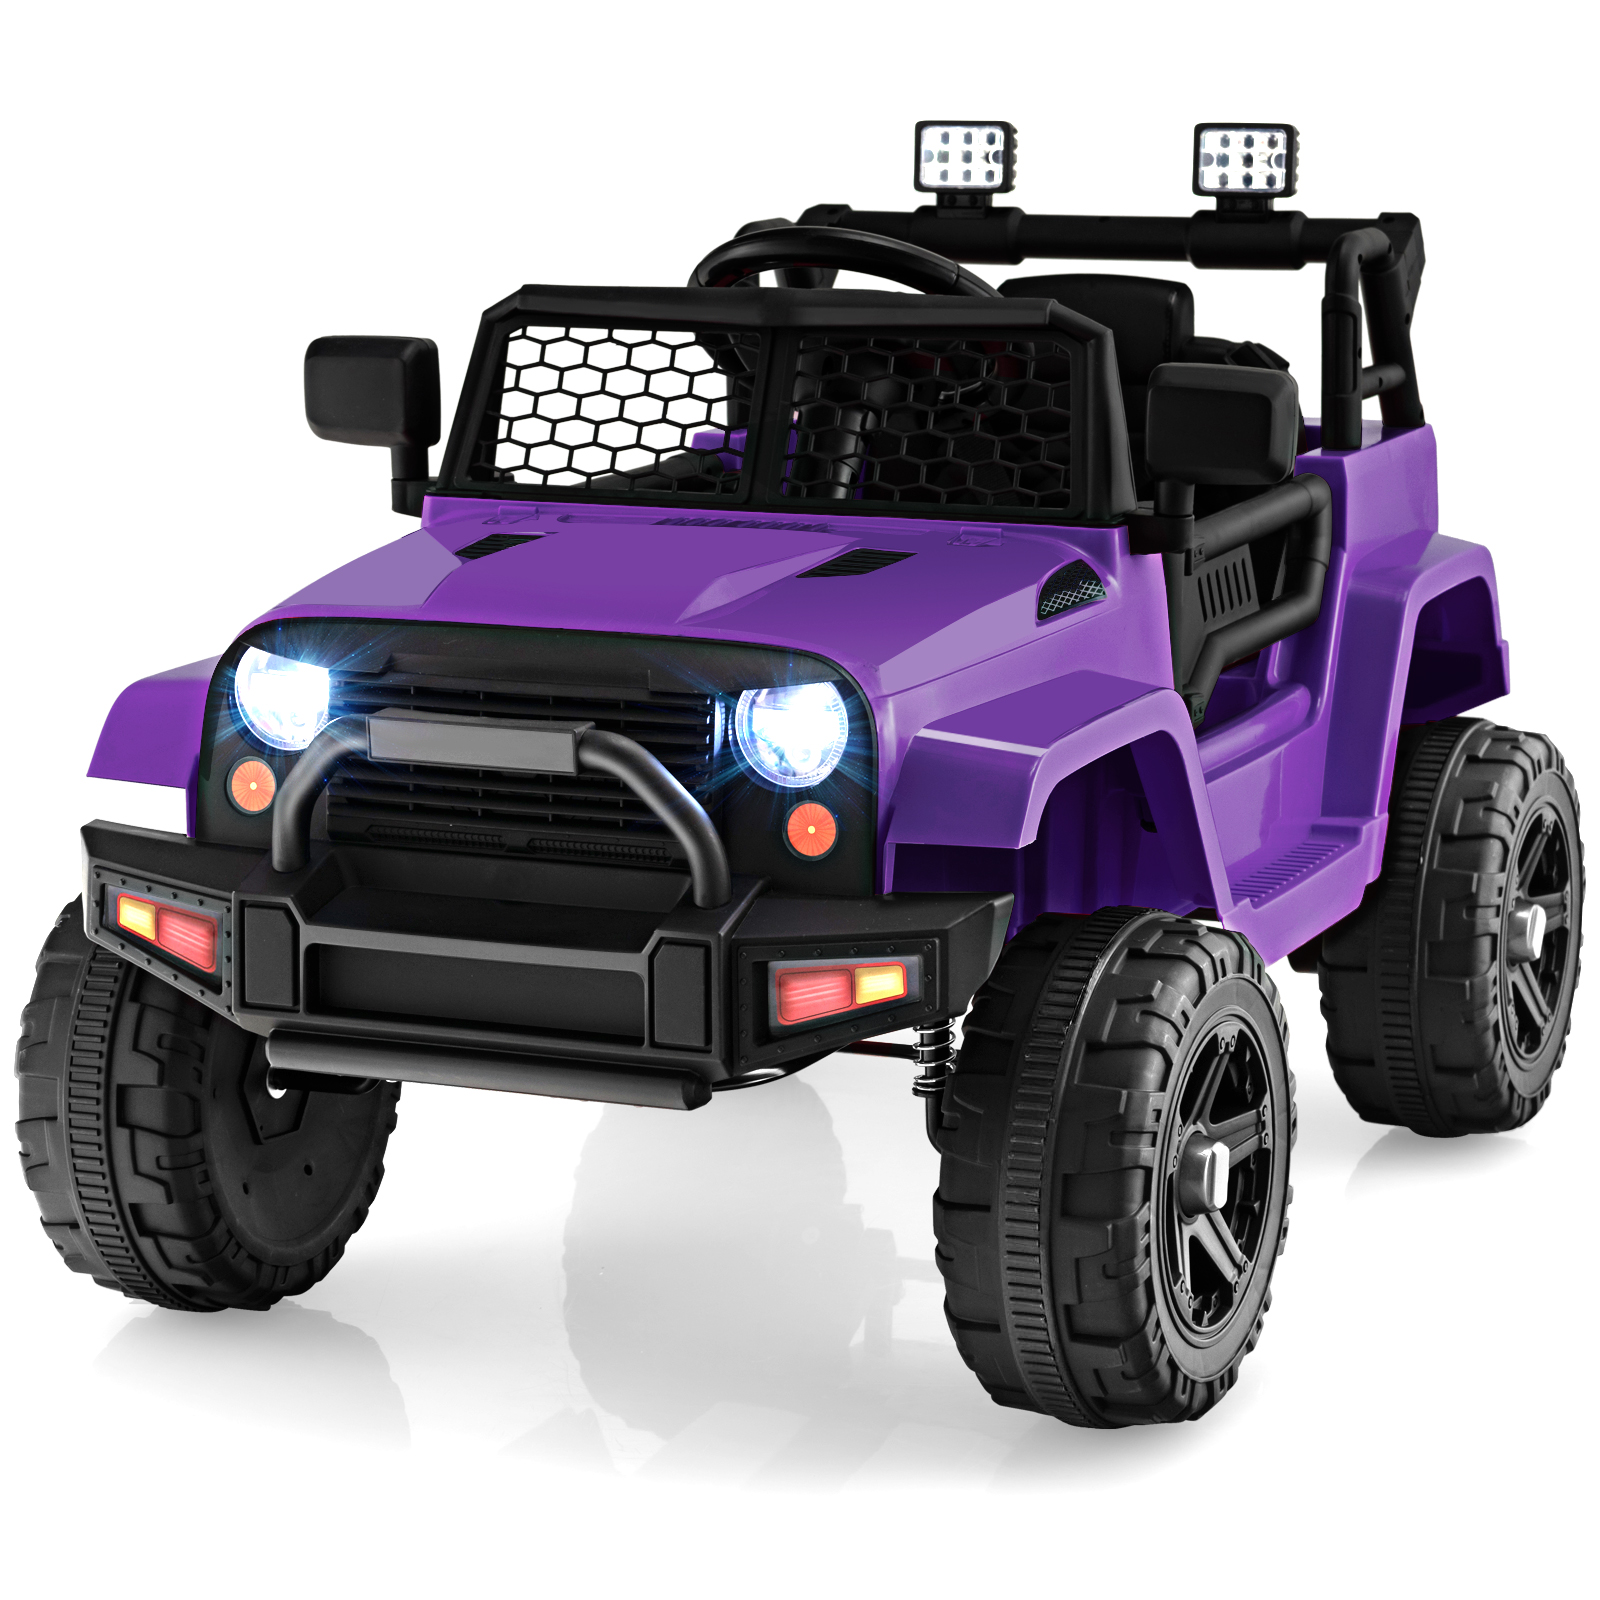 Topbuy 12V Kids Ride On Car Electric Vehicle Jeep with Parental Remote Music Horn Headlights Slow Start Function Purple - image 1 of 10